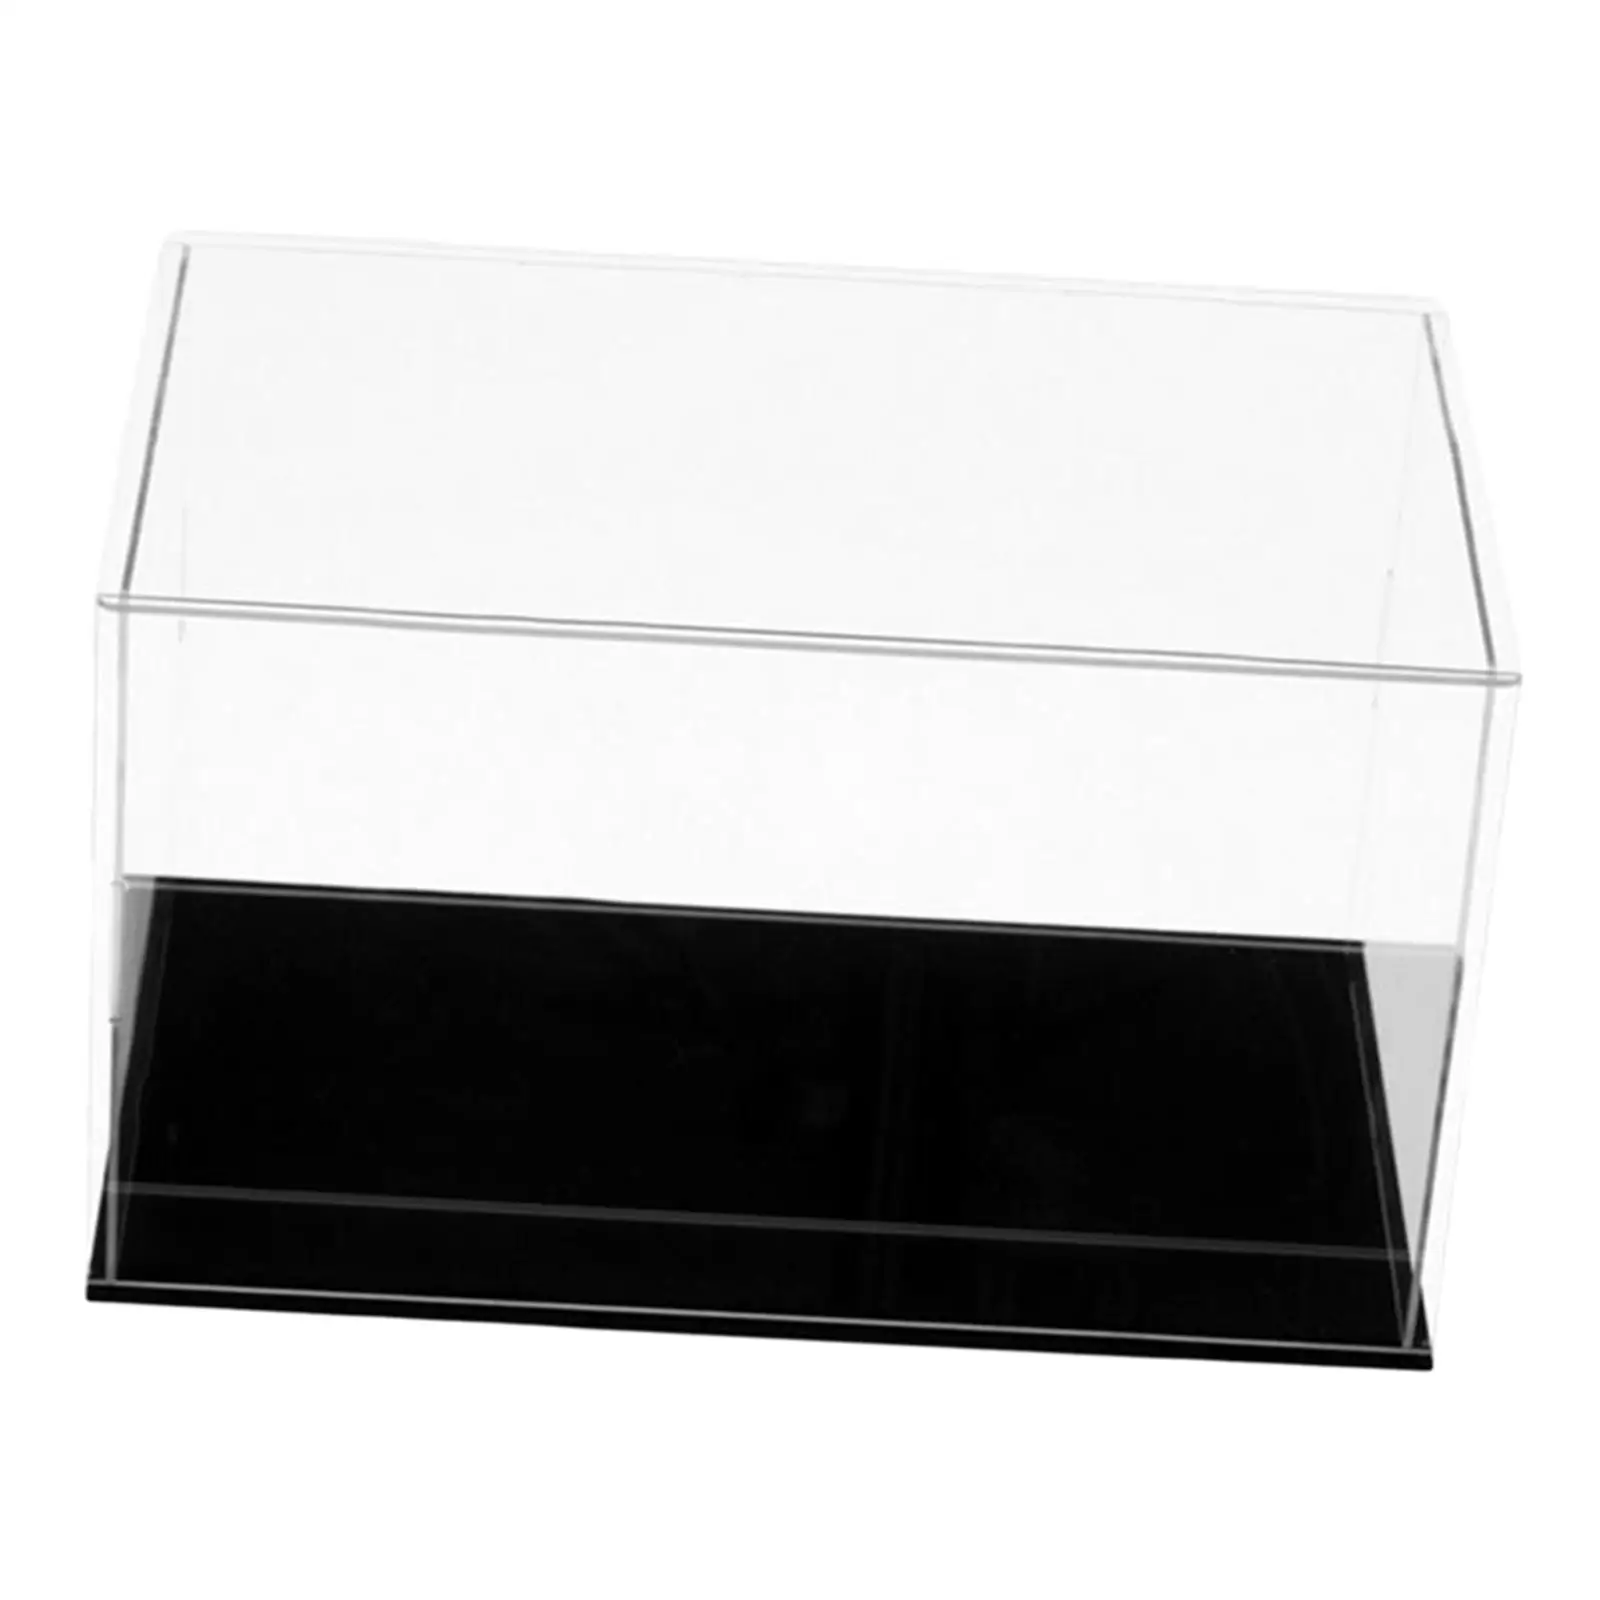 Acrylic Display Case Transparent for Plane Model Diecast Cars Model Dolls